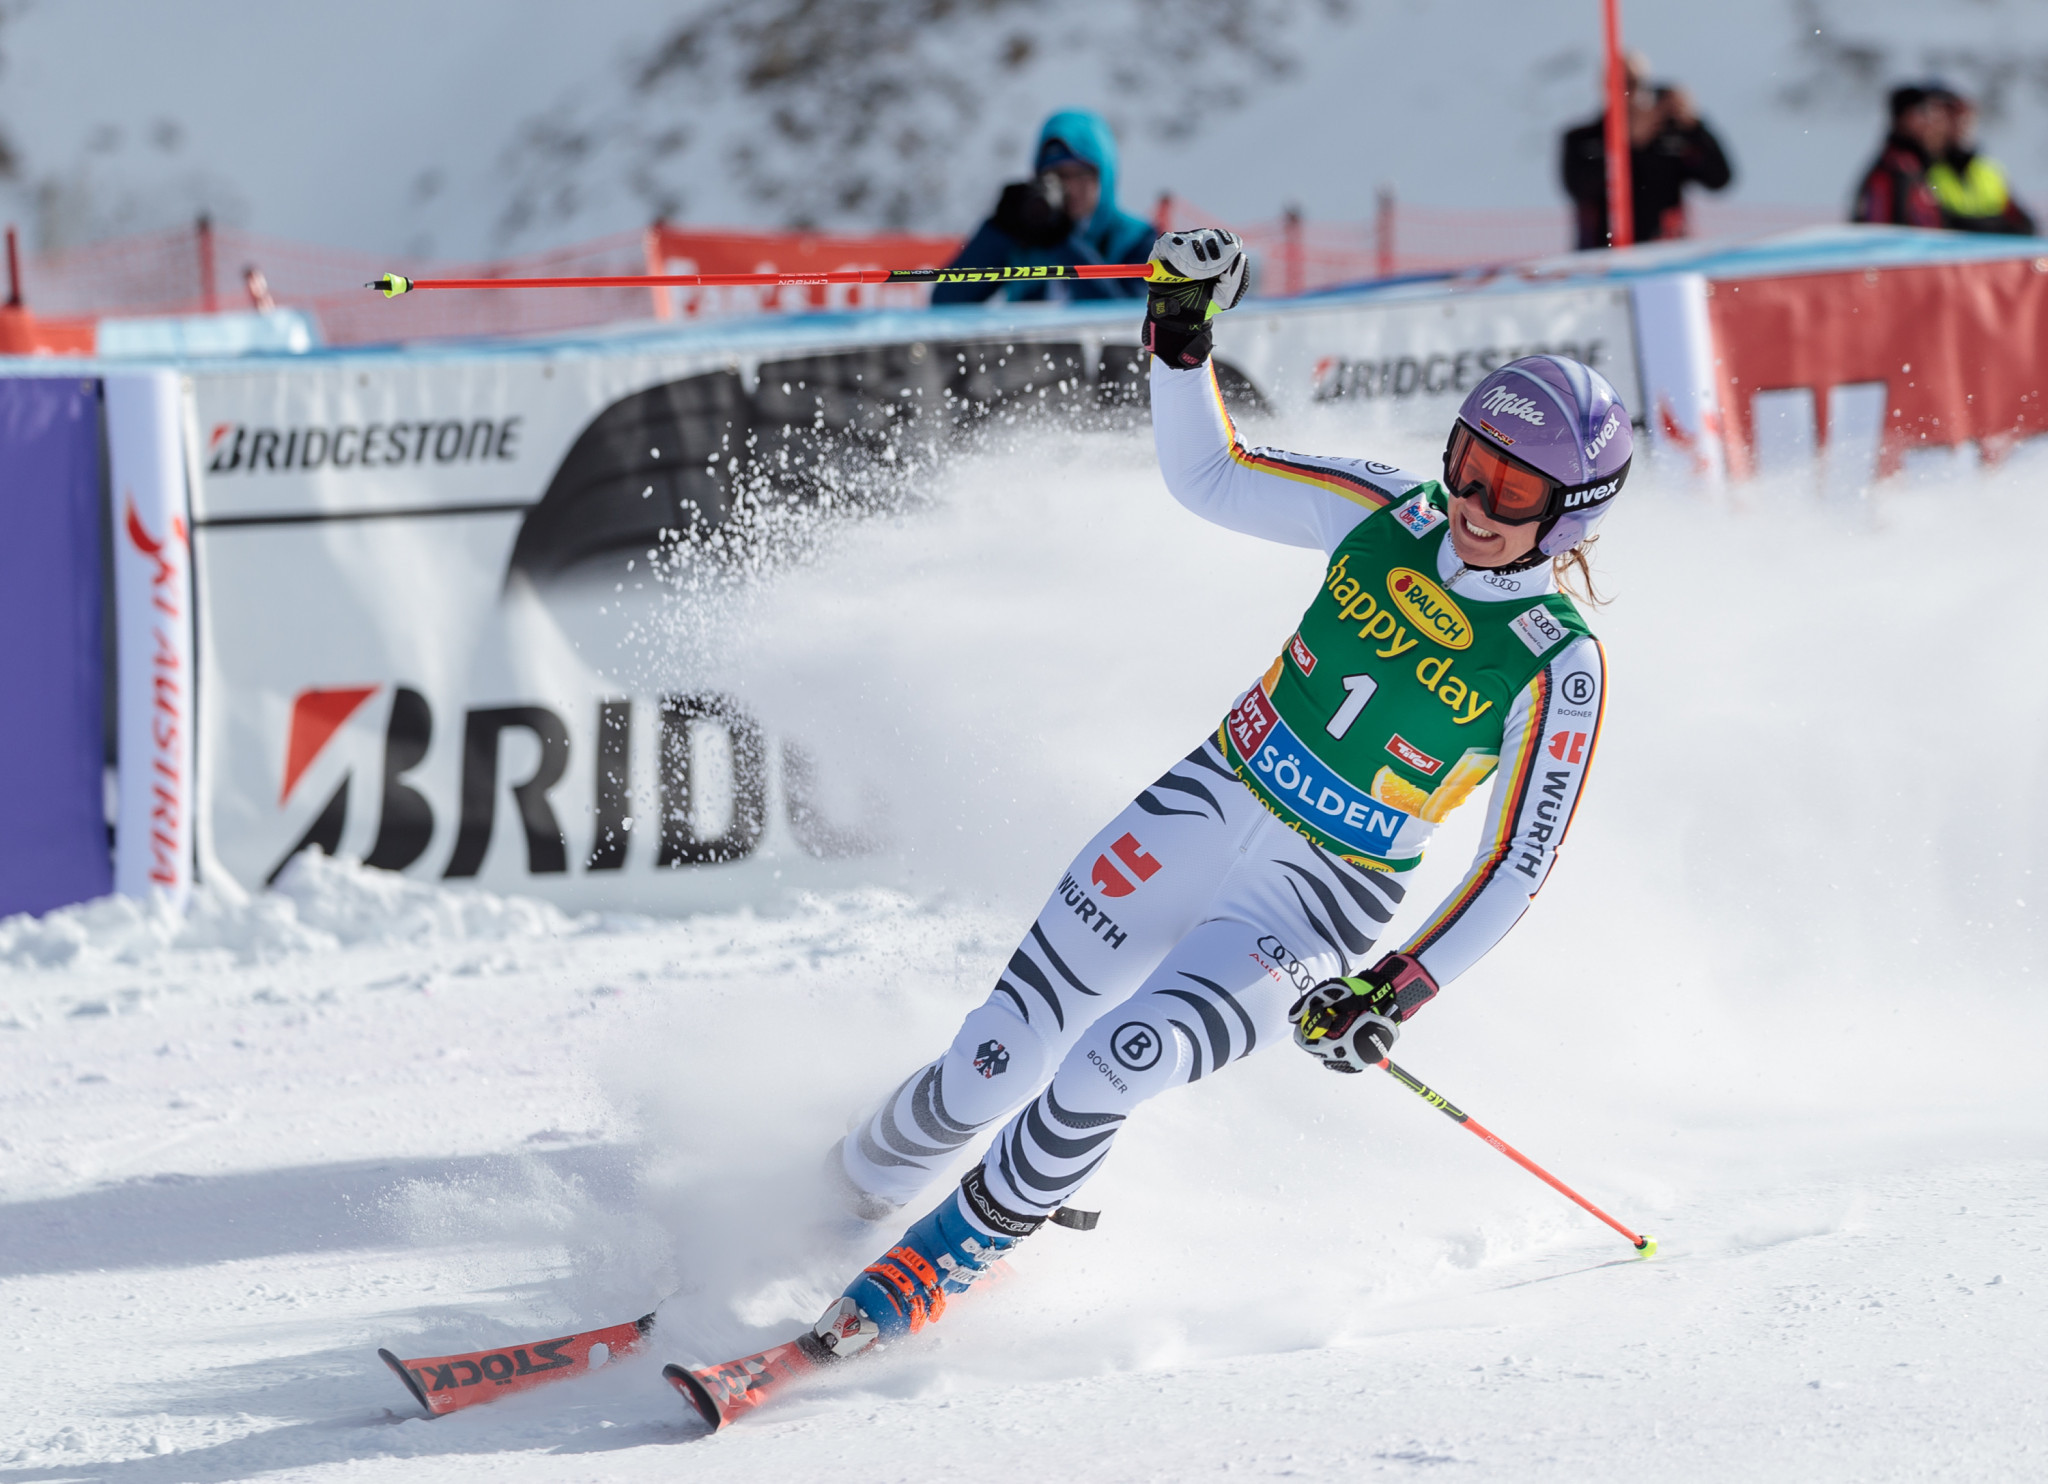 Germany’s Viktoria Rebensburg fought back from a mistake in her first run to win the season-opening giant slalom race at the FIS Alpine Skiing World Cup in Soelden in Austria ©Getty Images